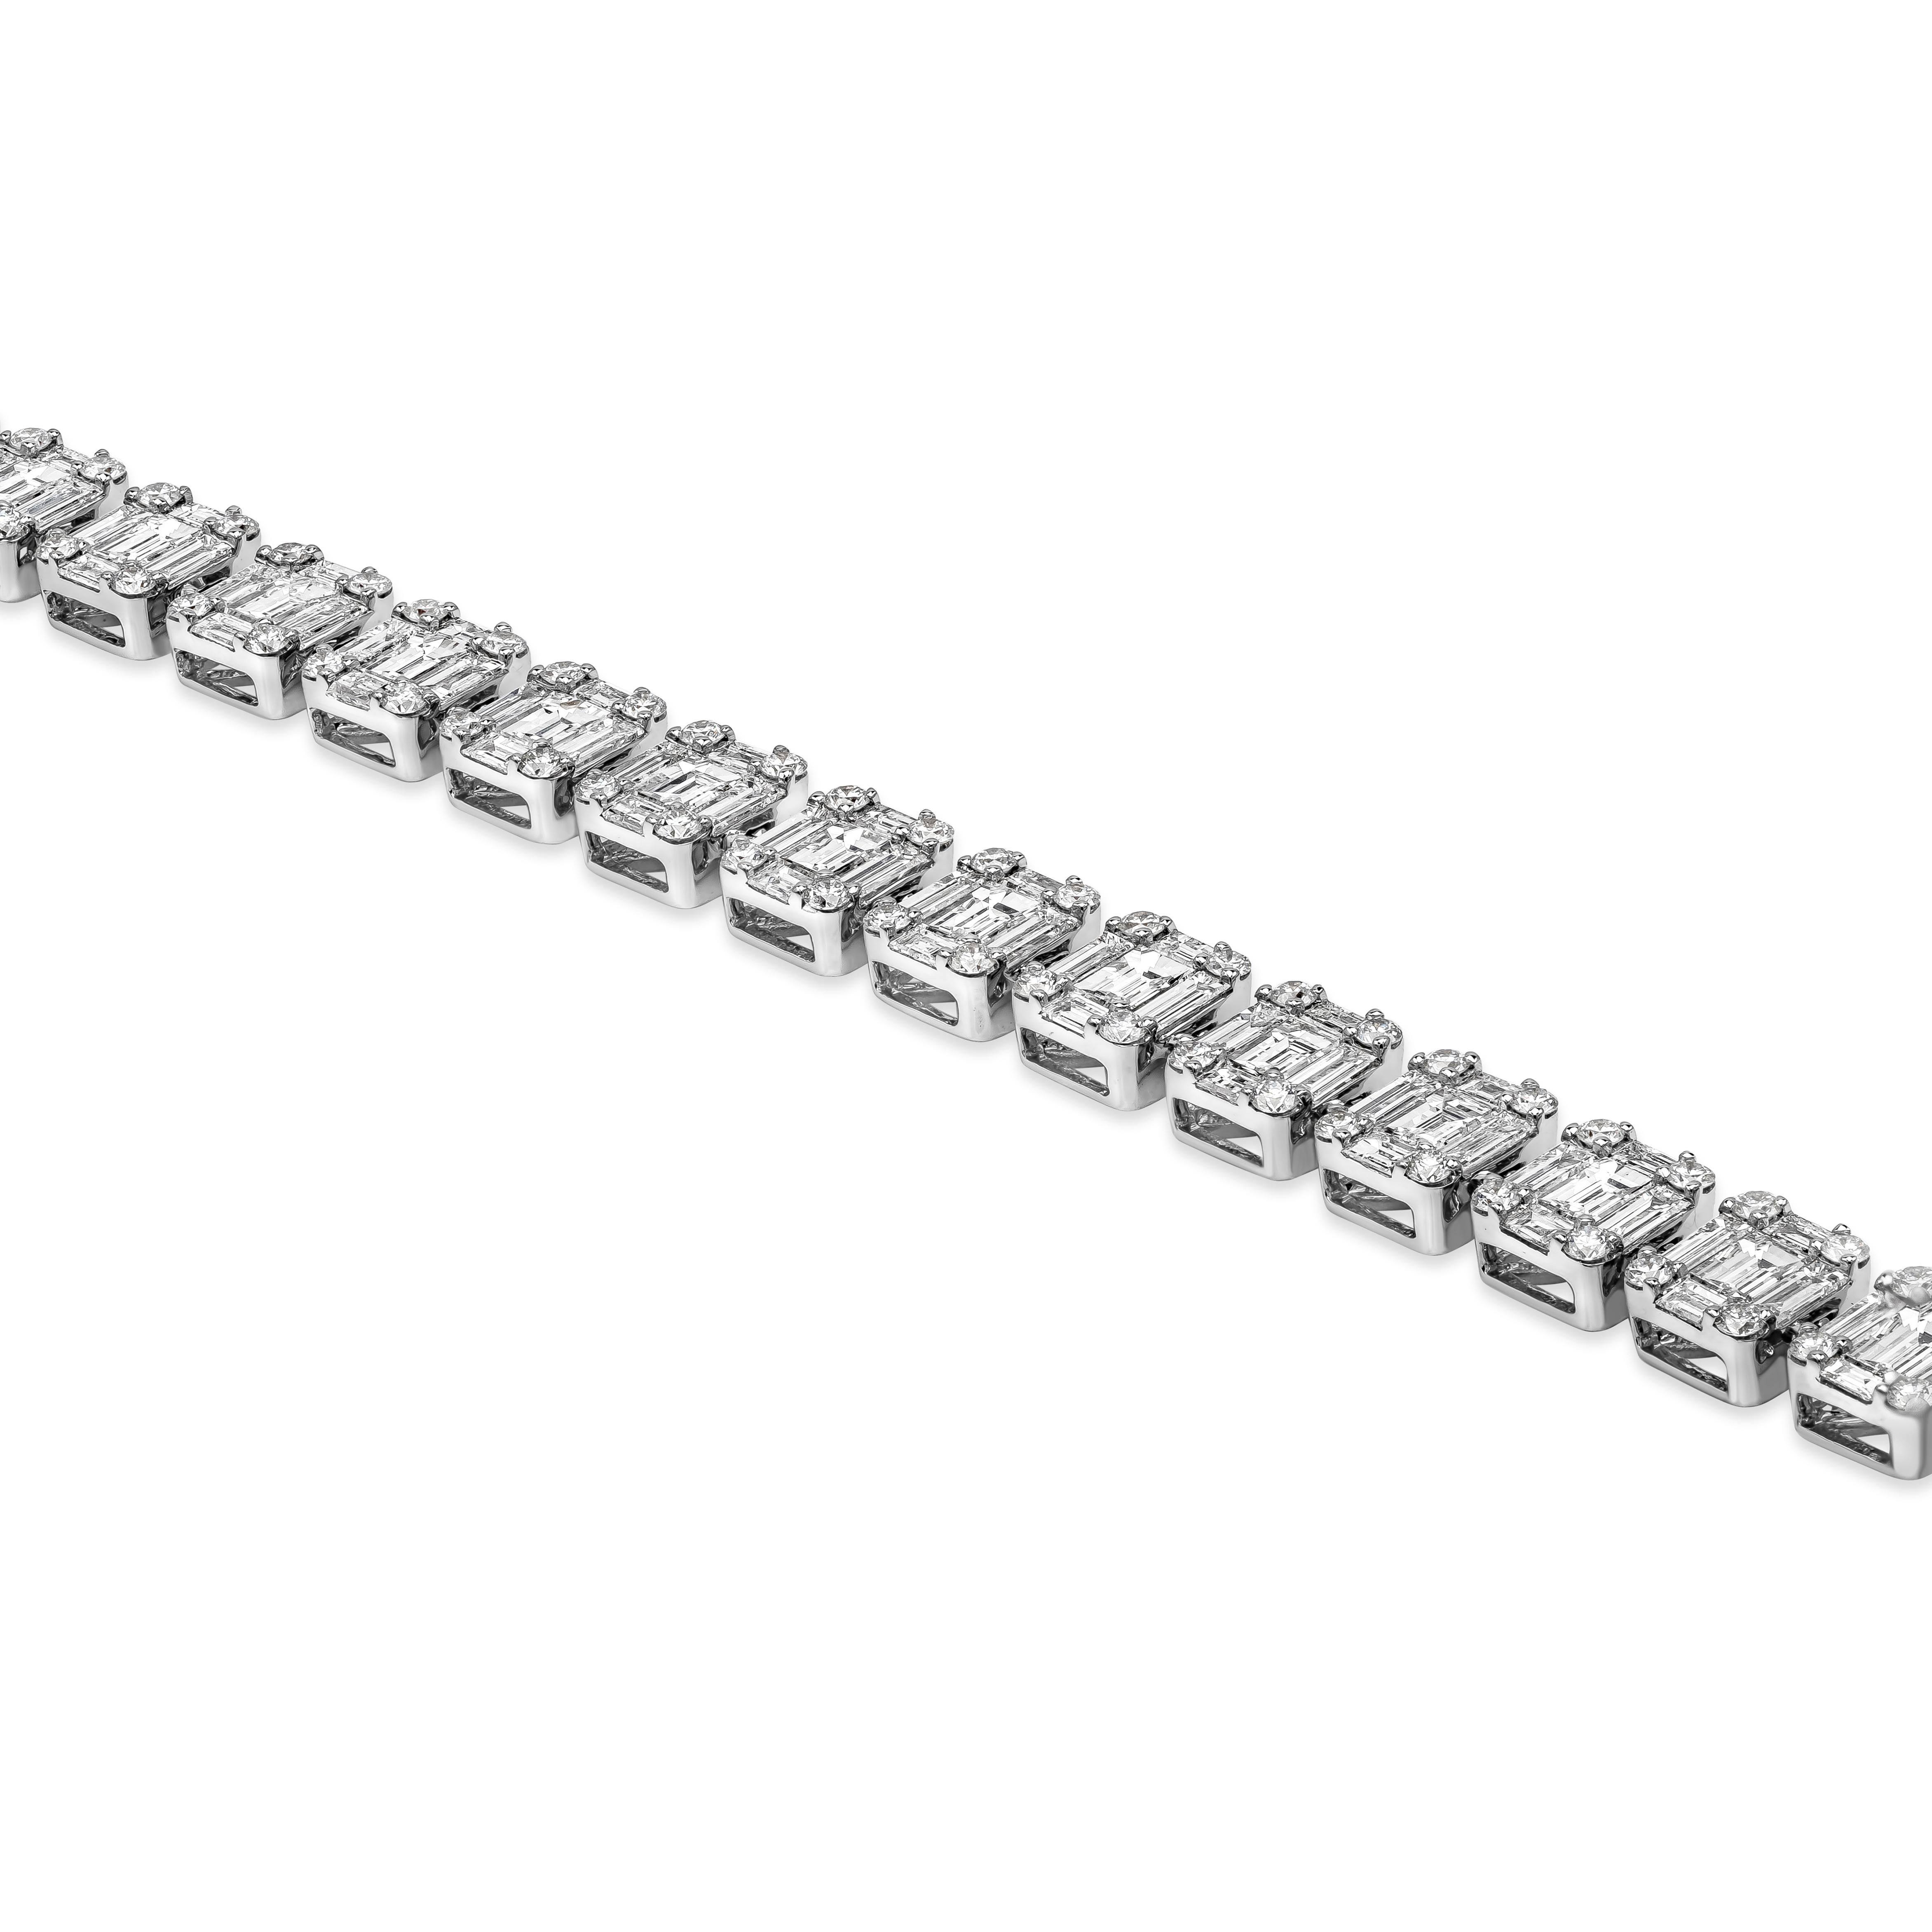 A unique and budget-friendly bracelet showcasing a cluster of baguette and round diamonds arranged to look like emerald cut diamonds, set in a polished 18k white gold mounting. Diamonds weigh 8.79 carats total and are approximately F-G color, VS